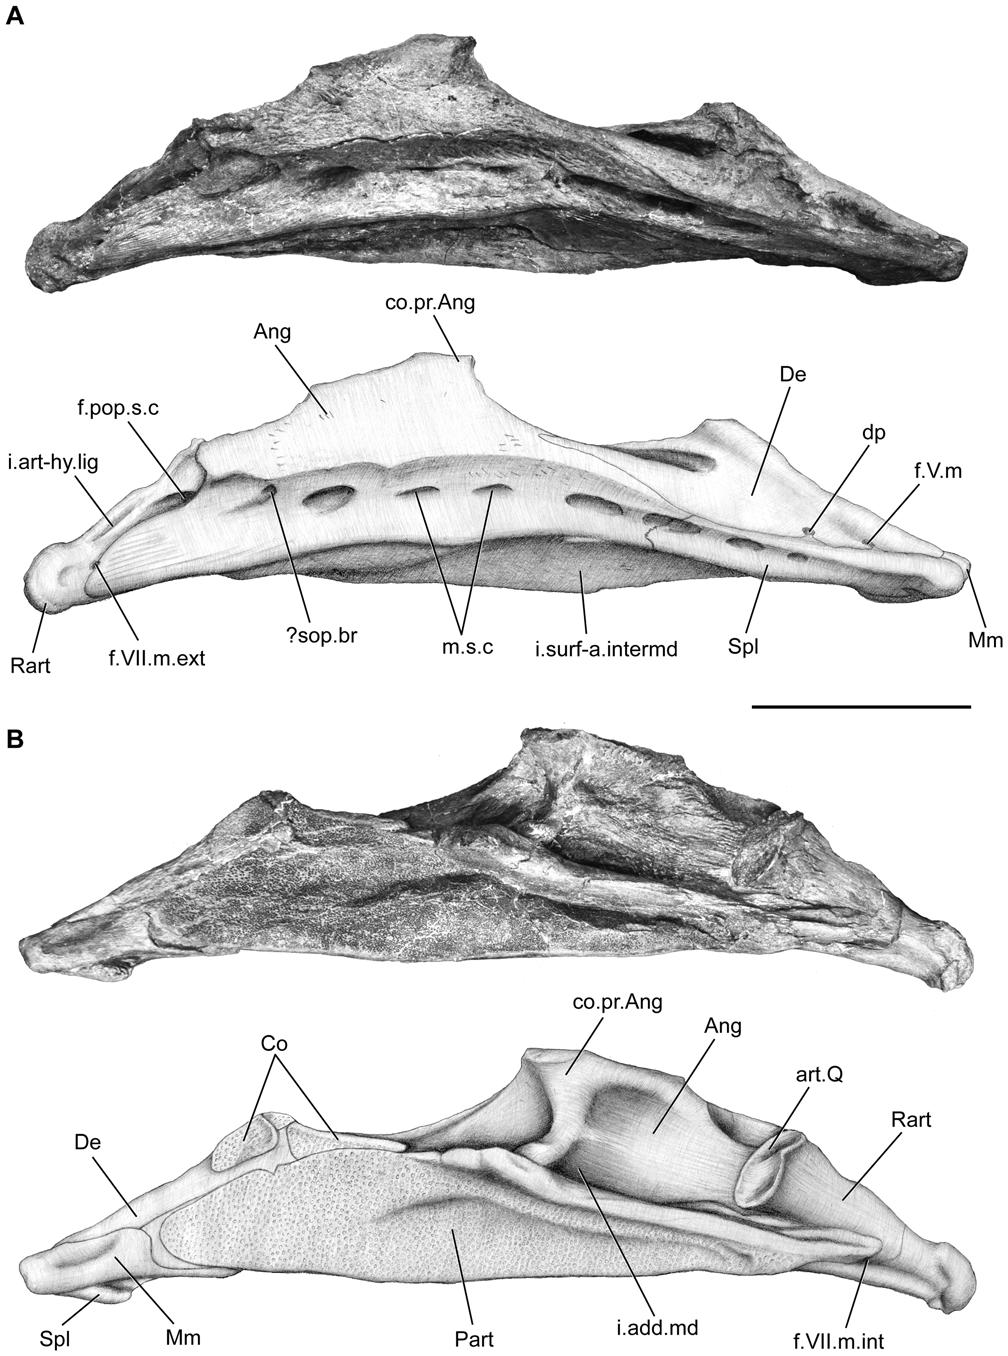 Figure 12. Megalocoelacanthus dobiei Schwimmer, Stewart & Williams, 1994, AMNH FF 20267 from lower Campanian of the Niobrara Formation. Right lower jaw. A, lateral view. B, medial view.